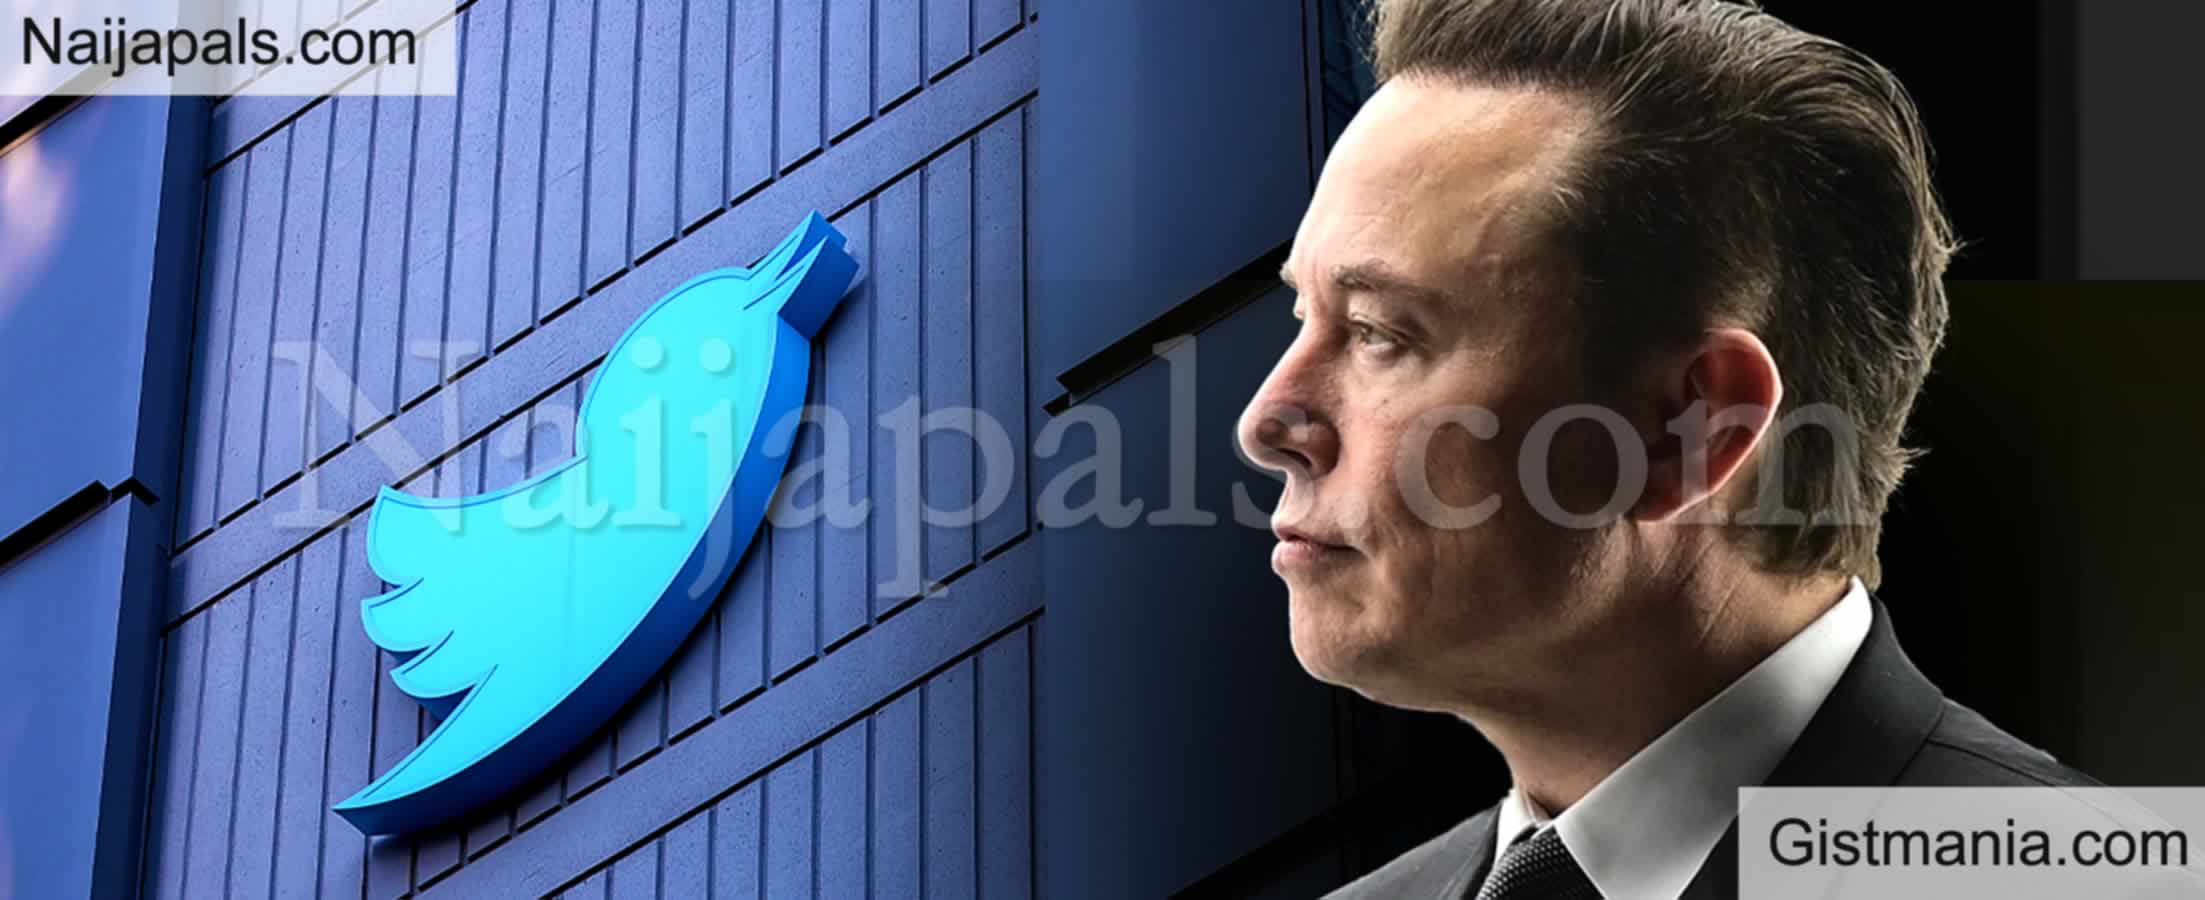 Twitter Accepts Elon Musk’s Proposal To Buy Company